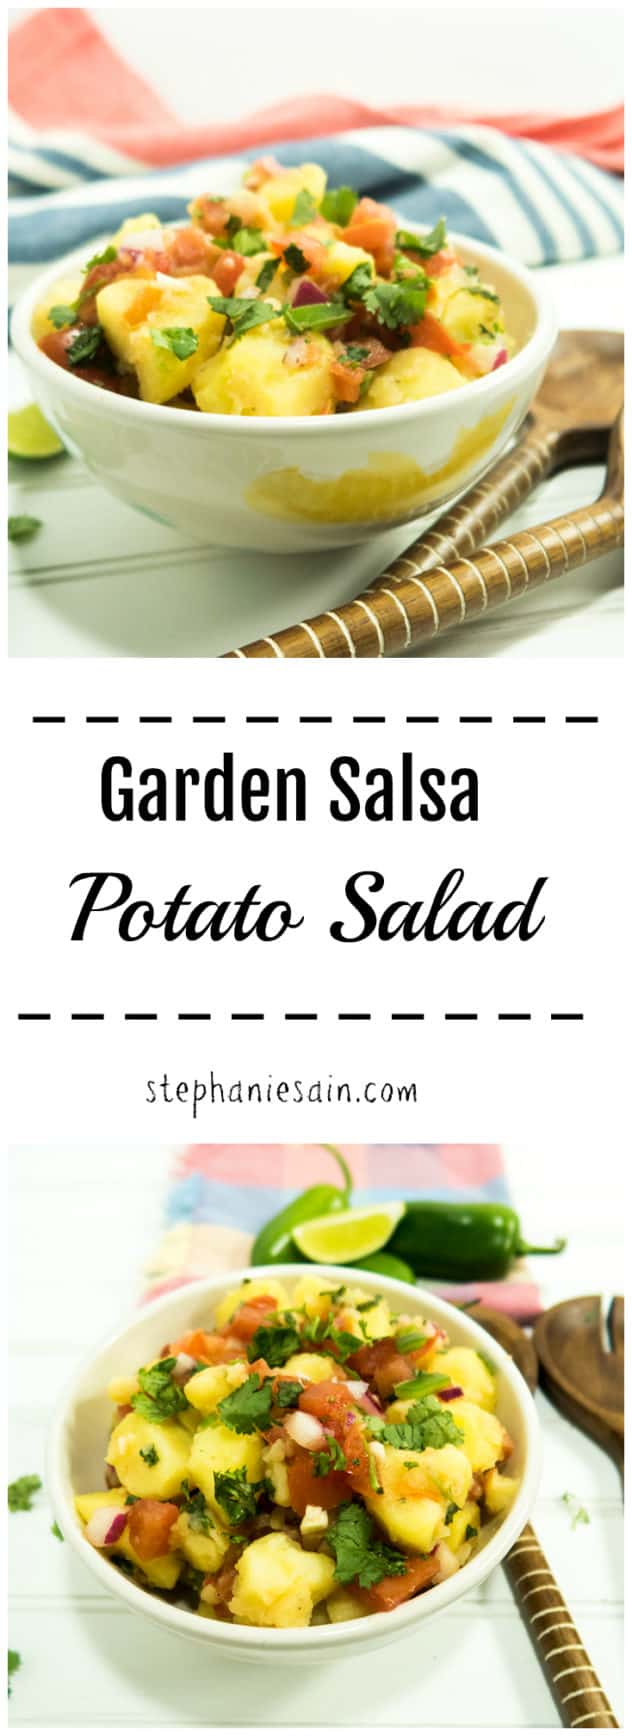 Garden Salsa Potato Salad is super easy to prepare, flavorful and great for all your summertime gatherings! Potatoes and salsa combined in a tasty salad that is both Vegan & Gluten Free.